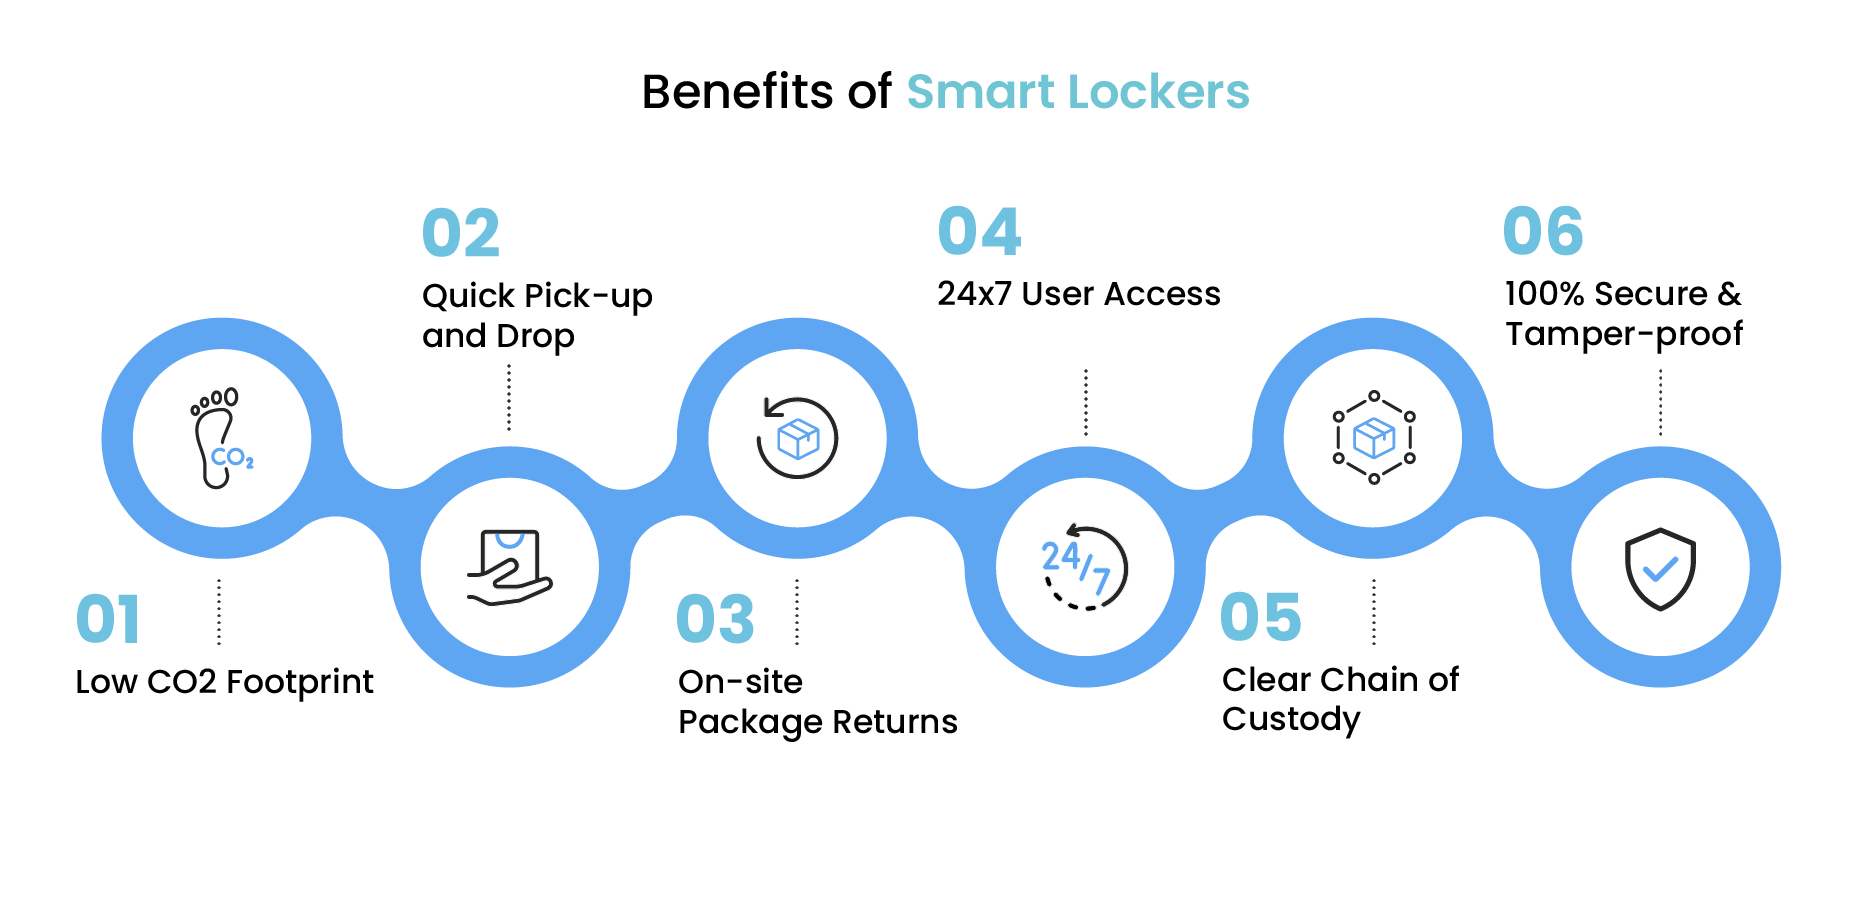 6 benefits of smart locker systems inside 6 blue circles and headings 